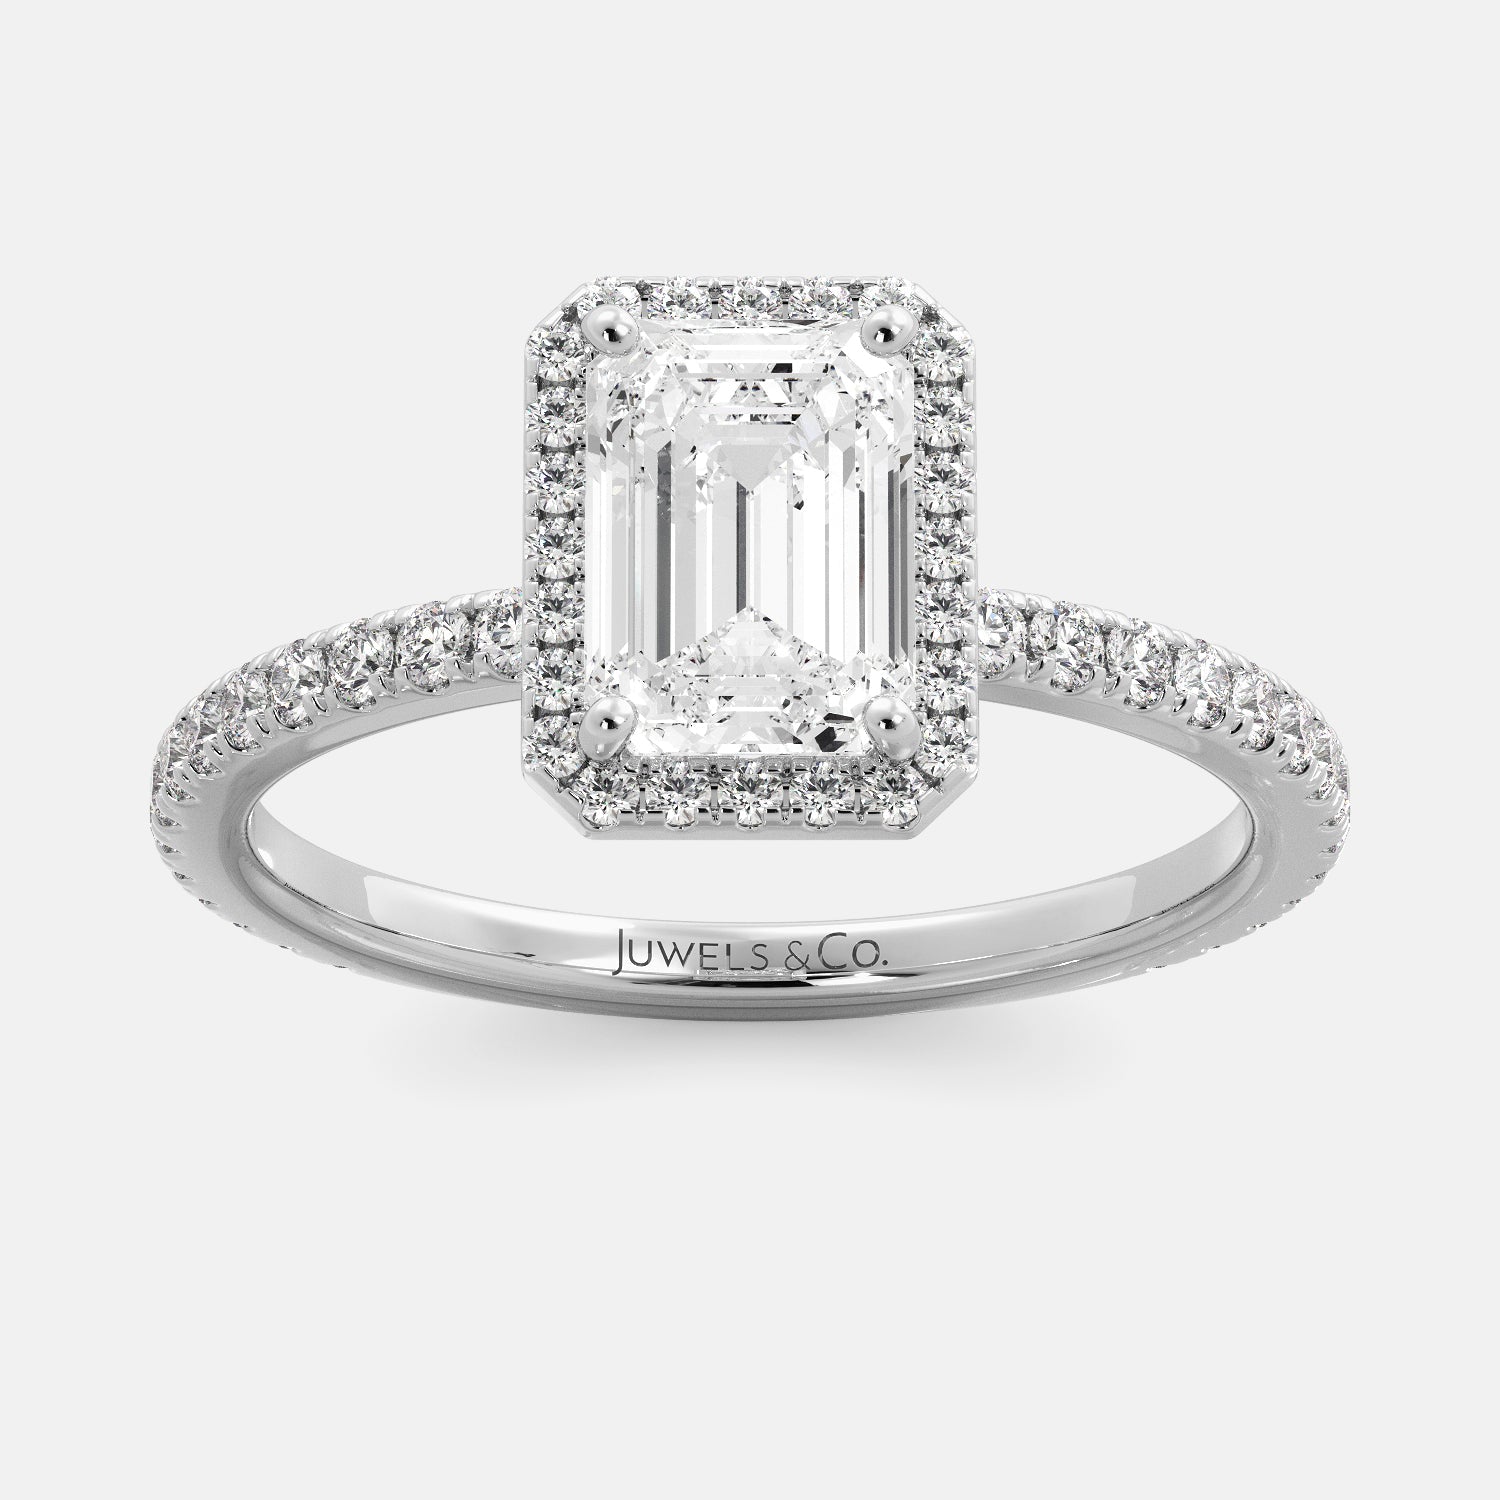 This image shows a stunning emerald halo lab-grown diamond ring with pavé on a white gold band. The ring features a 1.5-carat emerald-cut lab-grown diamond in the center, surrounded by a halo of smaller lab-grown diamonds. The ring is made of 14k white gold and is available in a variety of sizes.